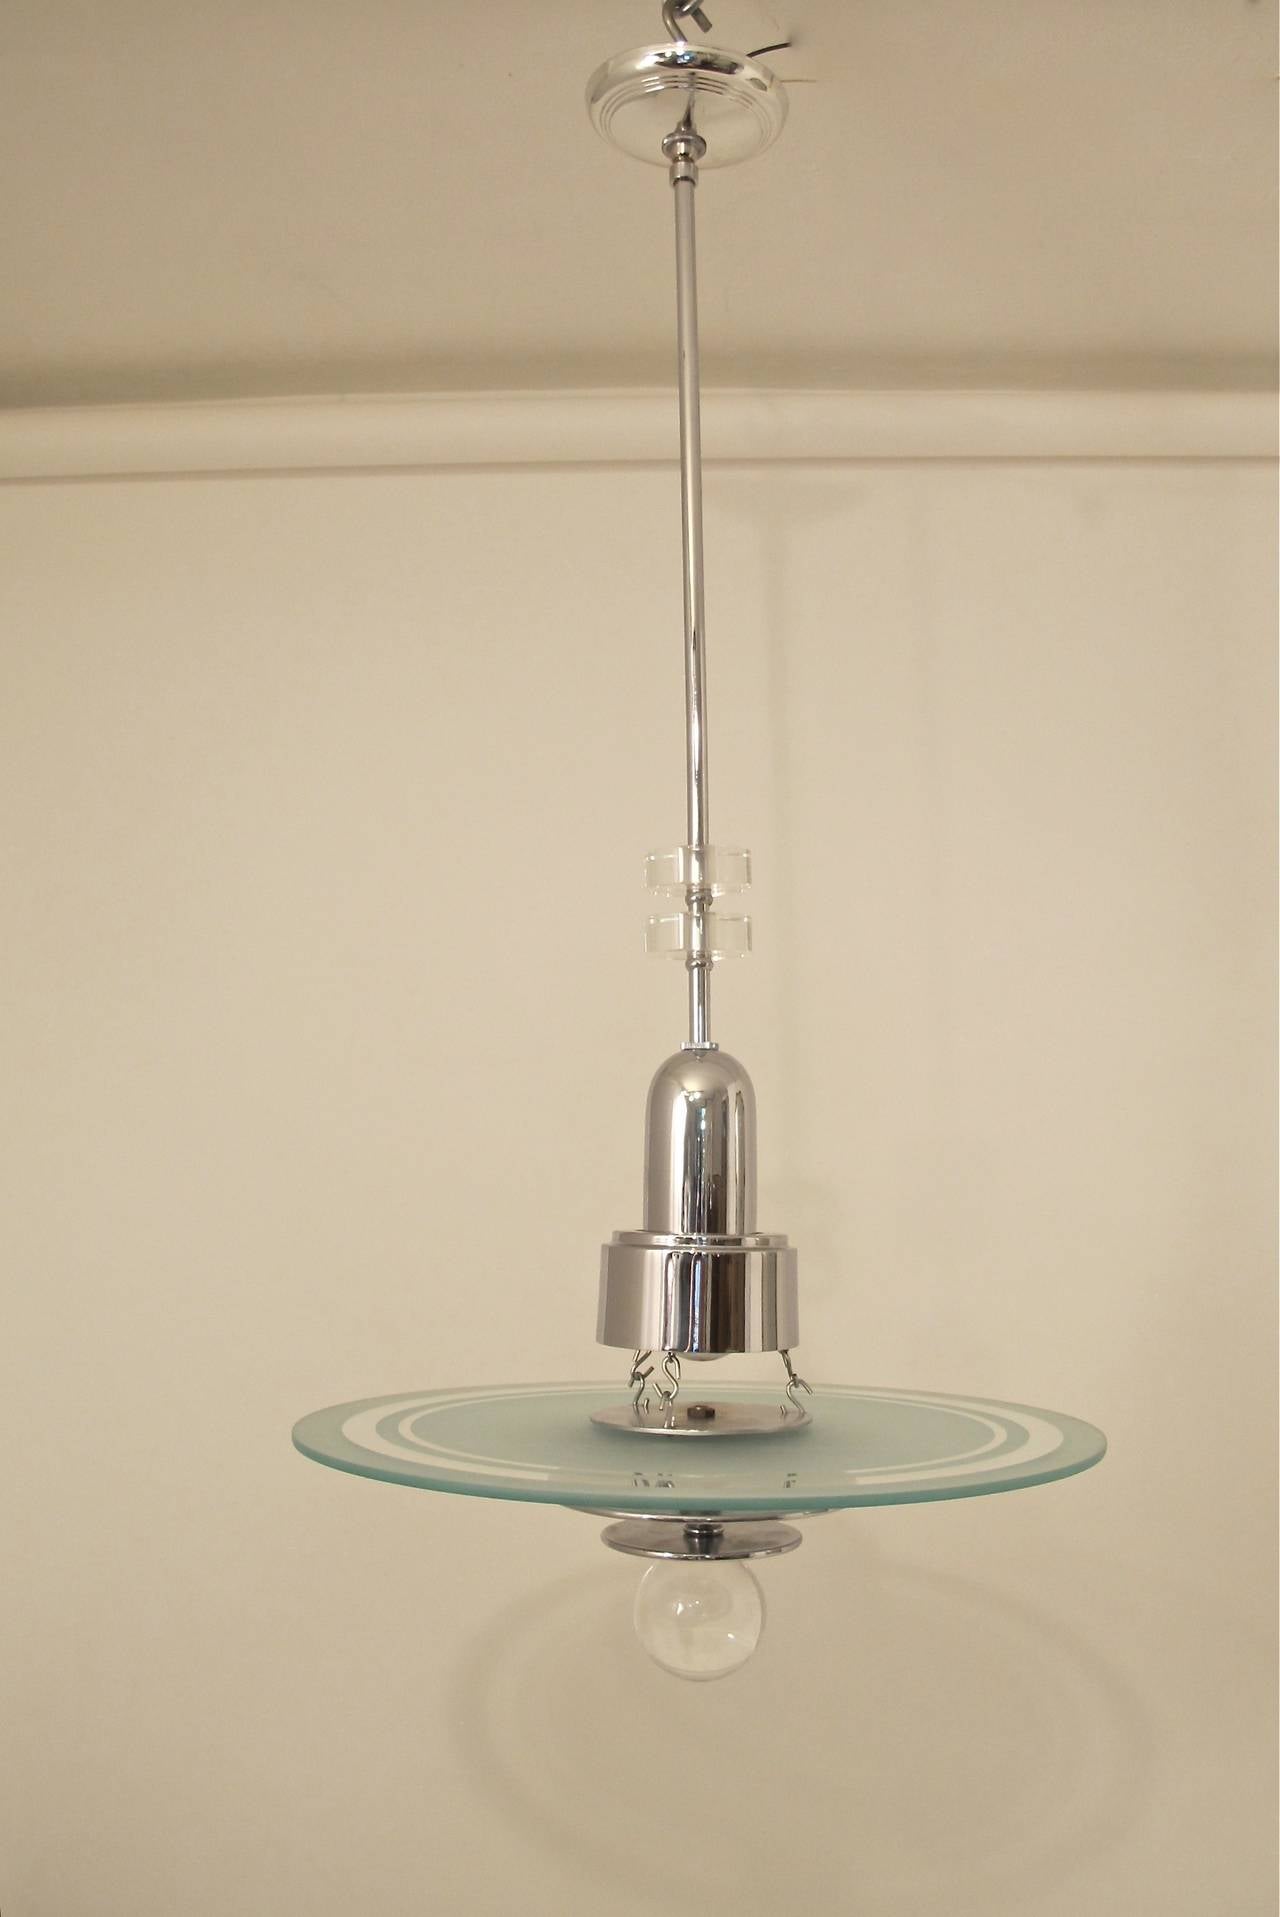 American Mid-Century Deco Streamline Moderne Style Chrome and Glass Ceiling  Fixture 